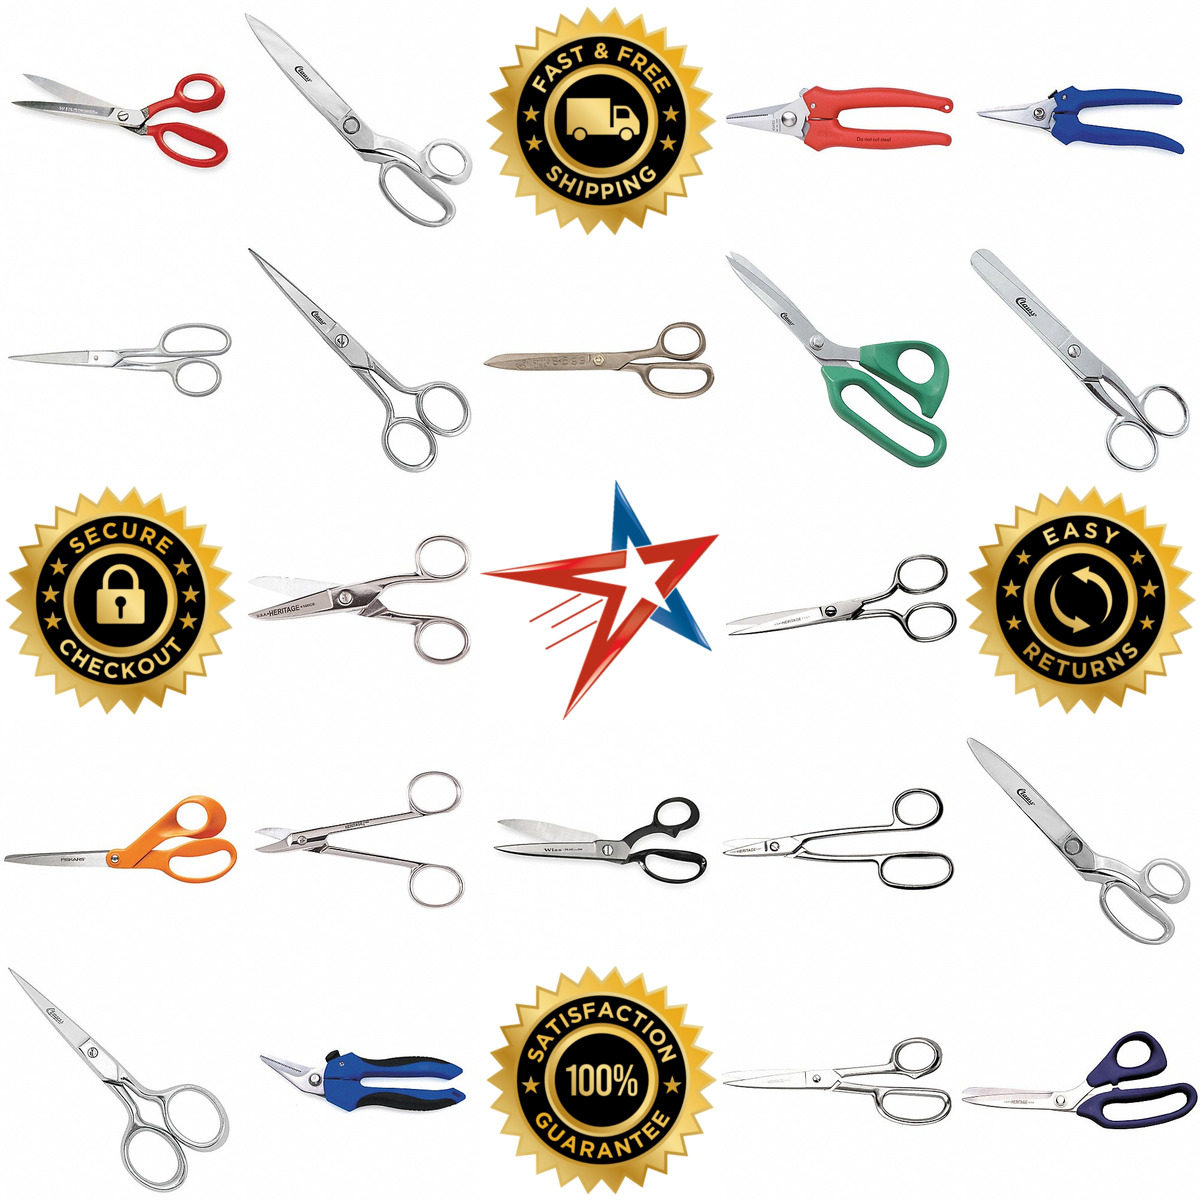 A selection of Shears and Scissors products on GoVets